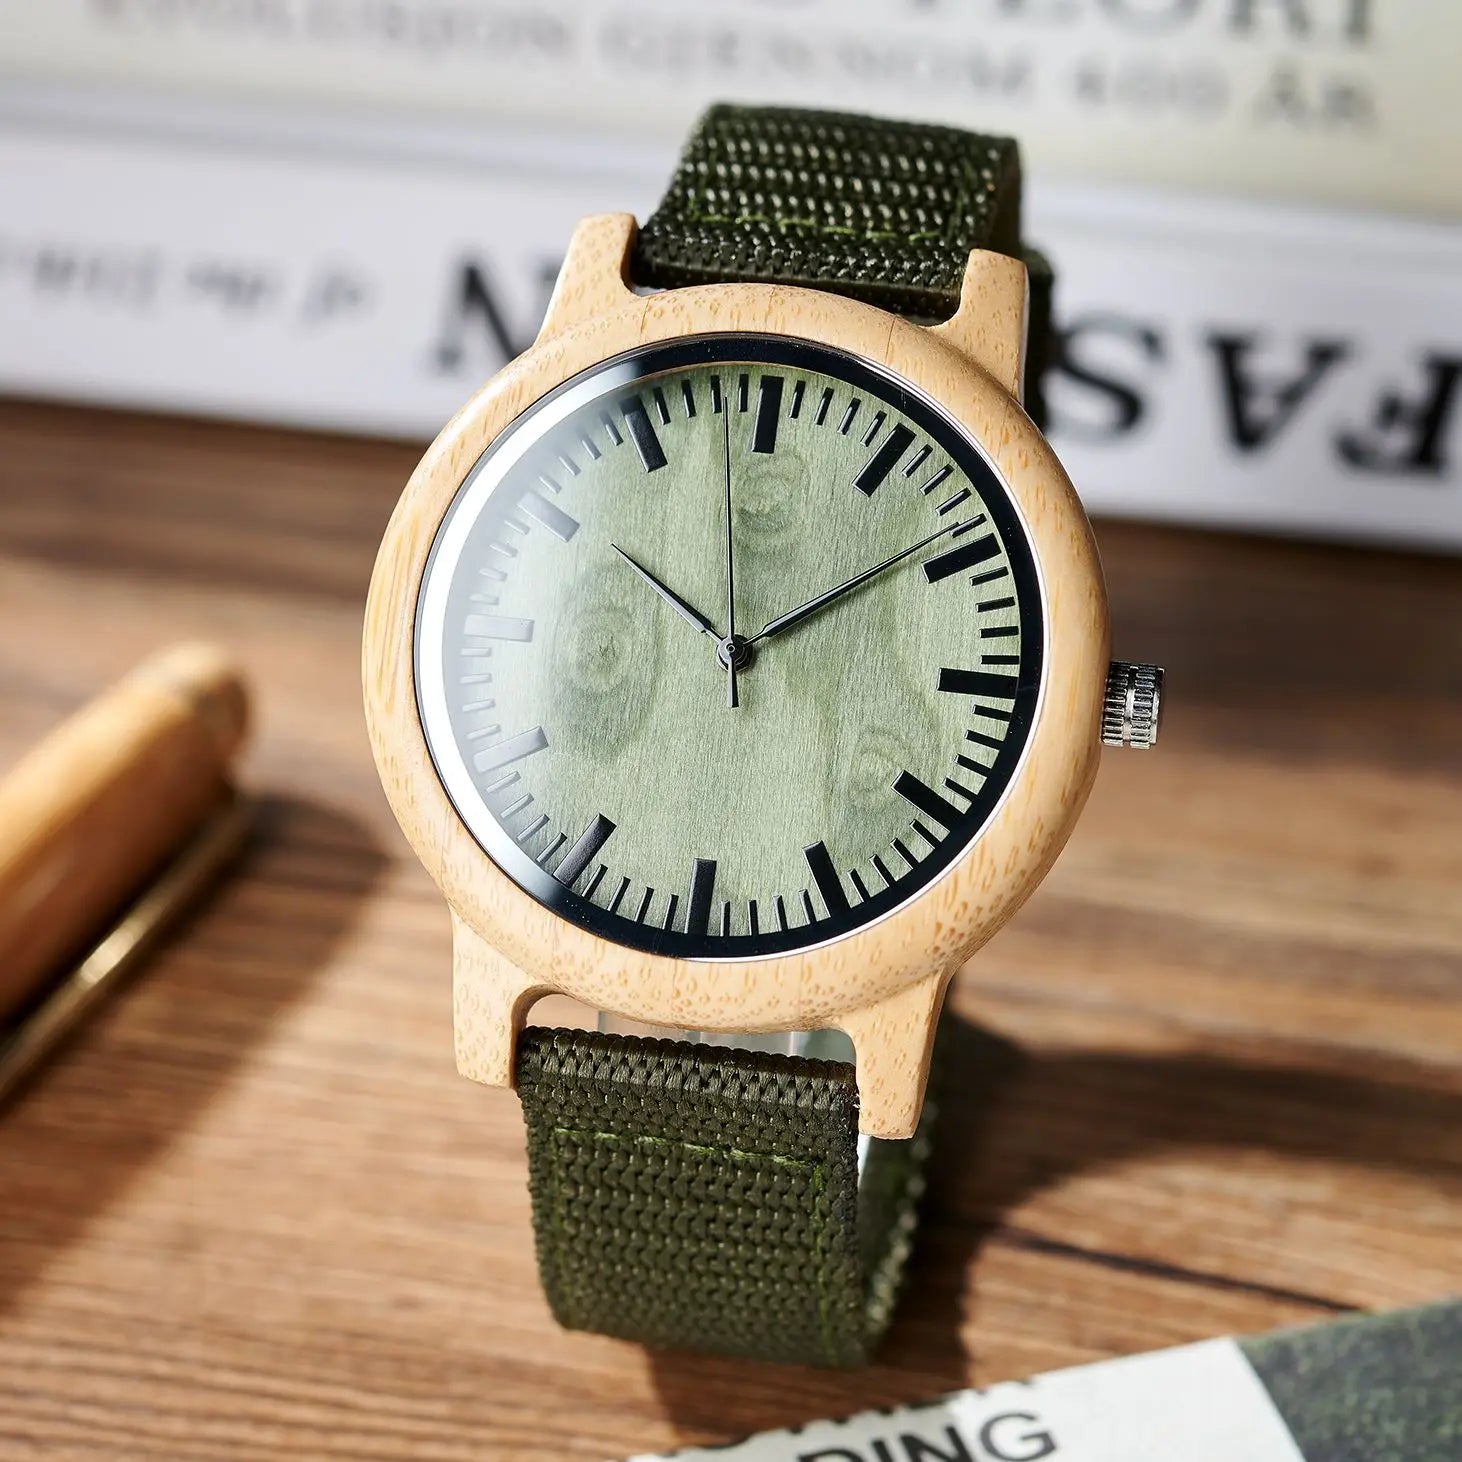 BOBO BIRD Stylish Wooden Watches for Men & Women Leather Strap Quartz Watches Support Drop Shipping